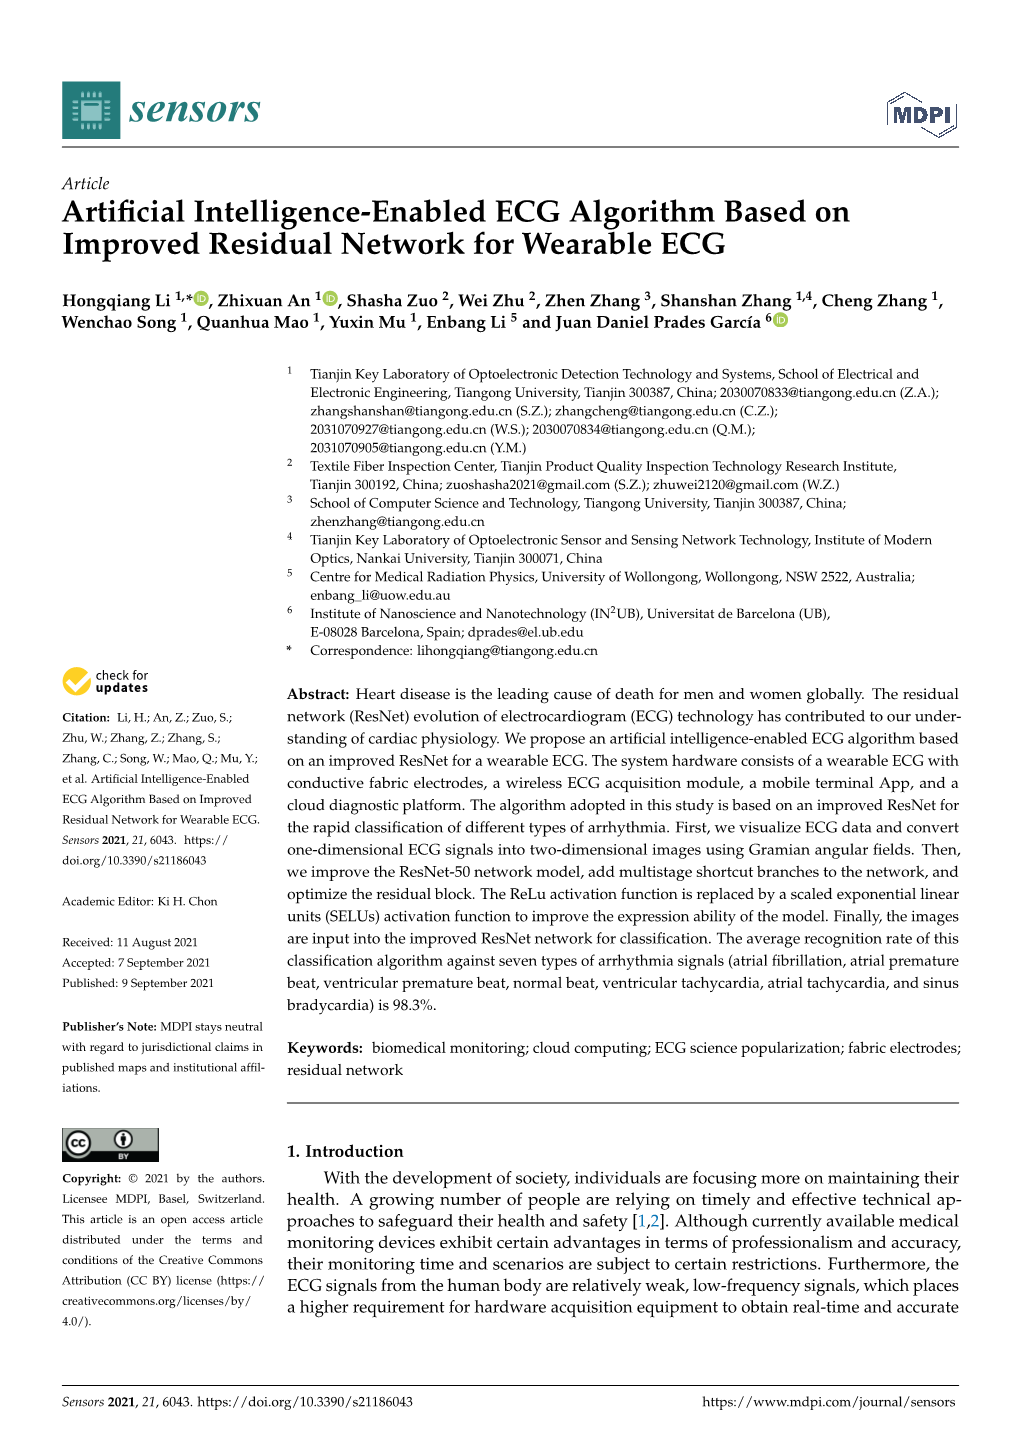 Artificial Intelligence-Enabled ECG Algorithm Based on Improved Residual Network for Wearable